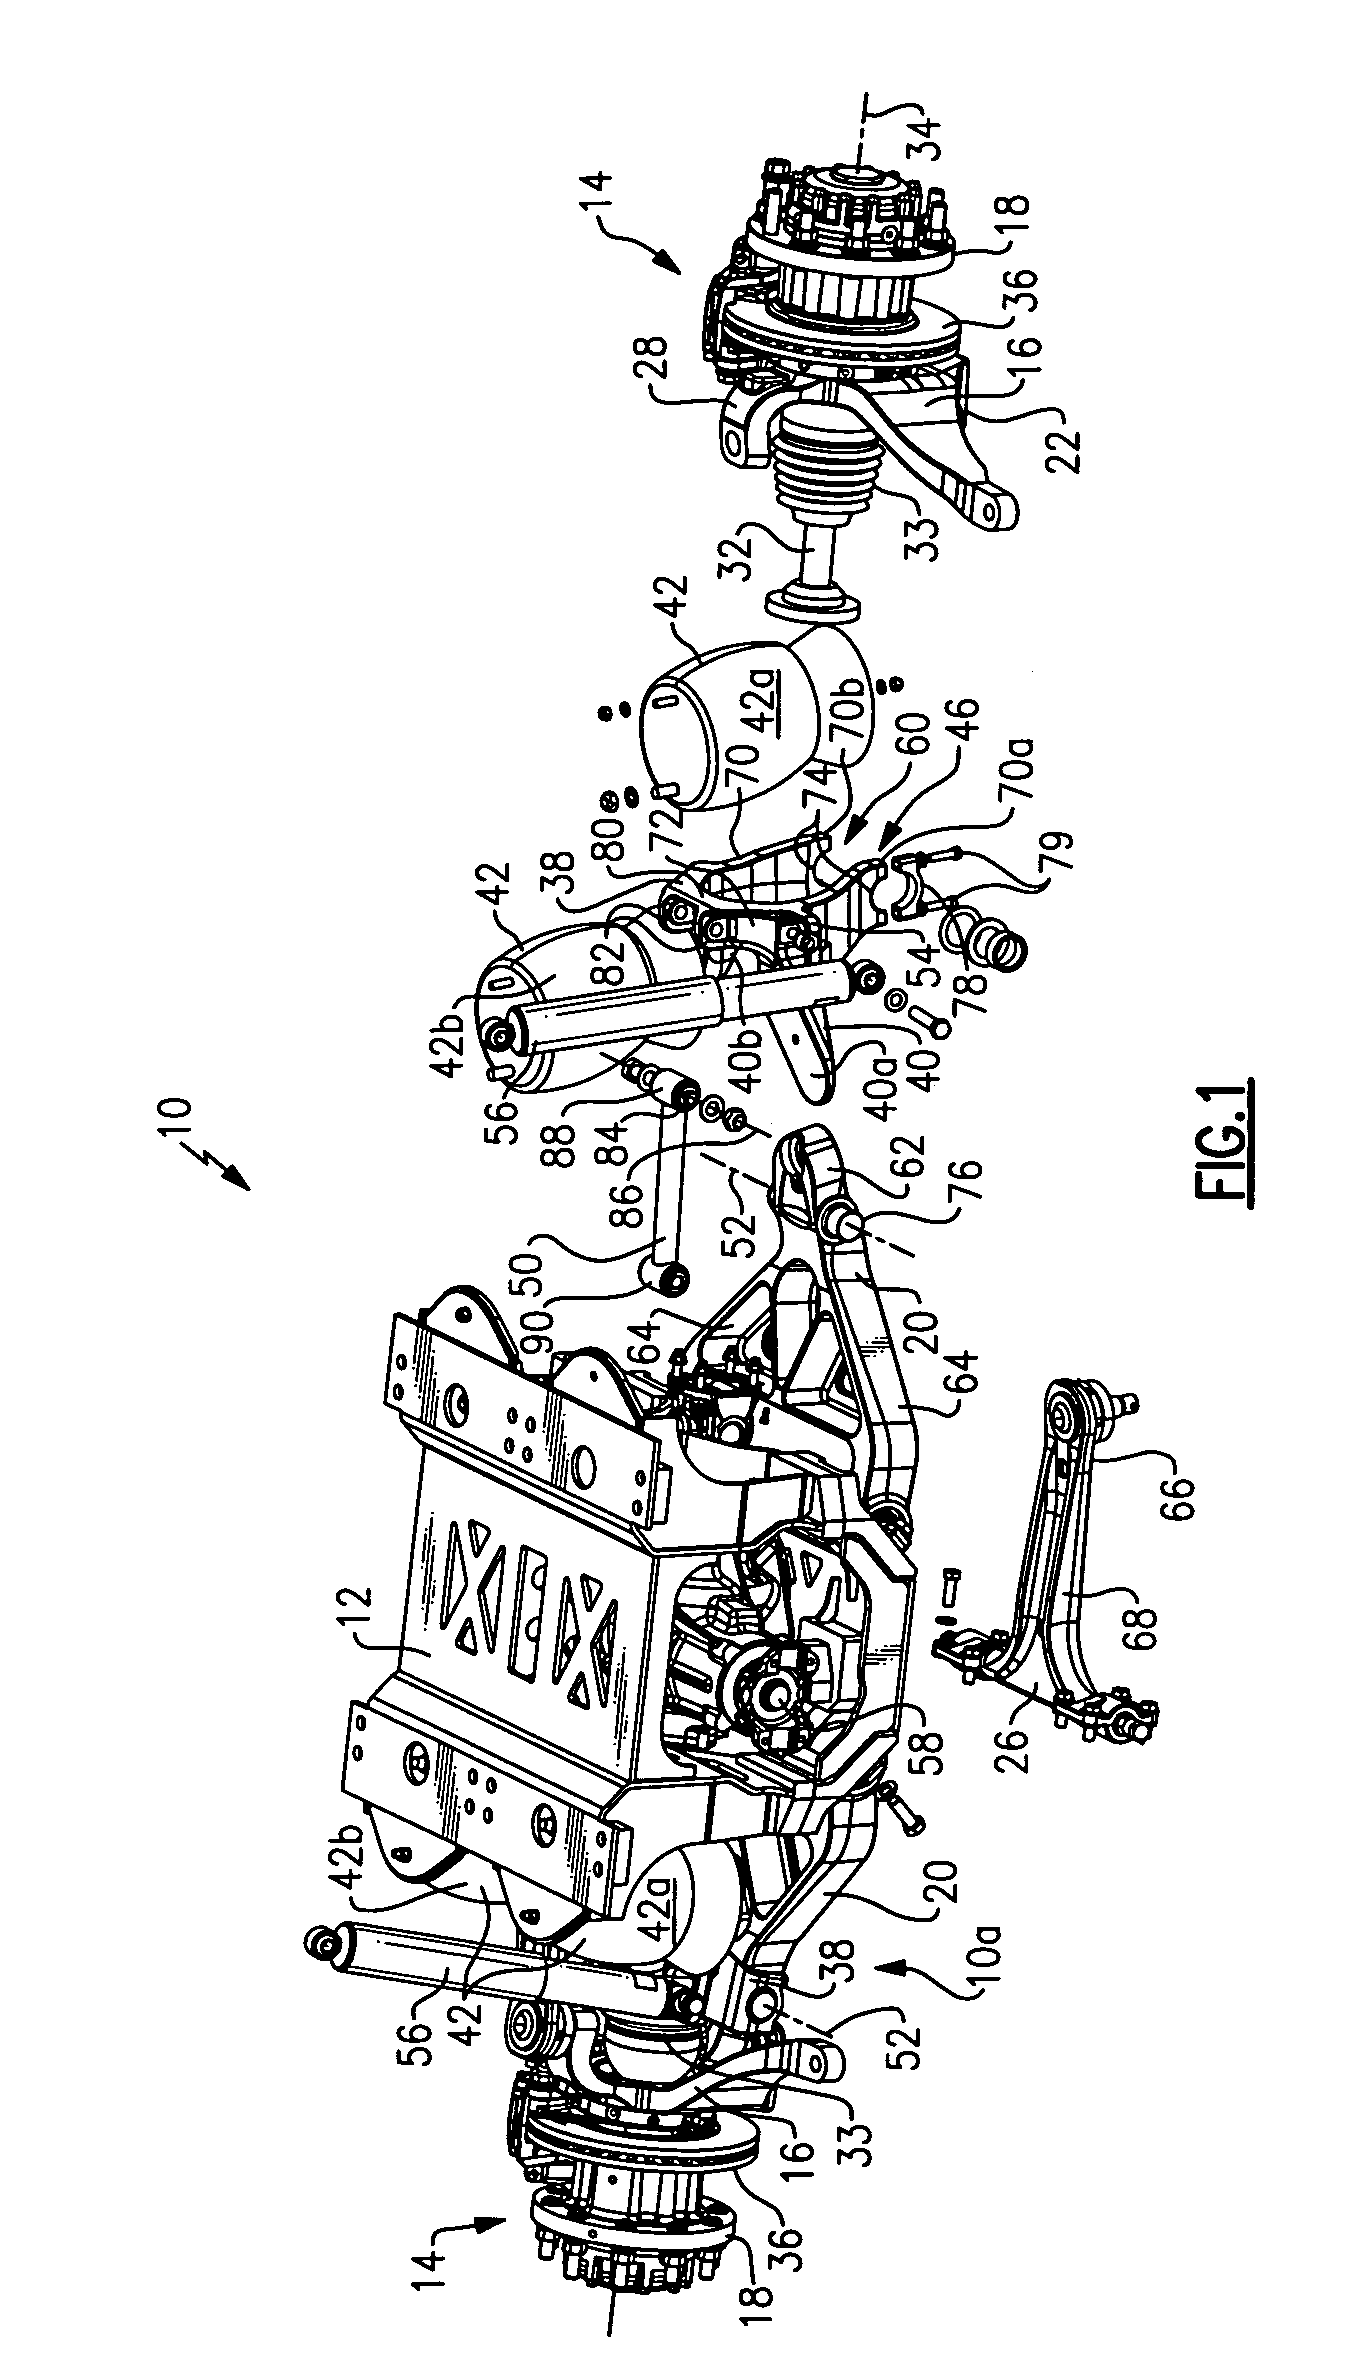 Six link independent suspension for a drive axle